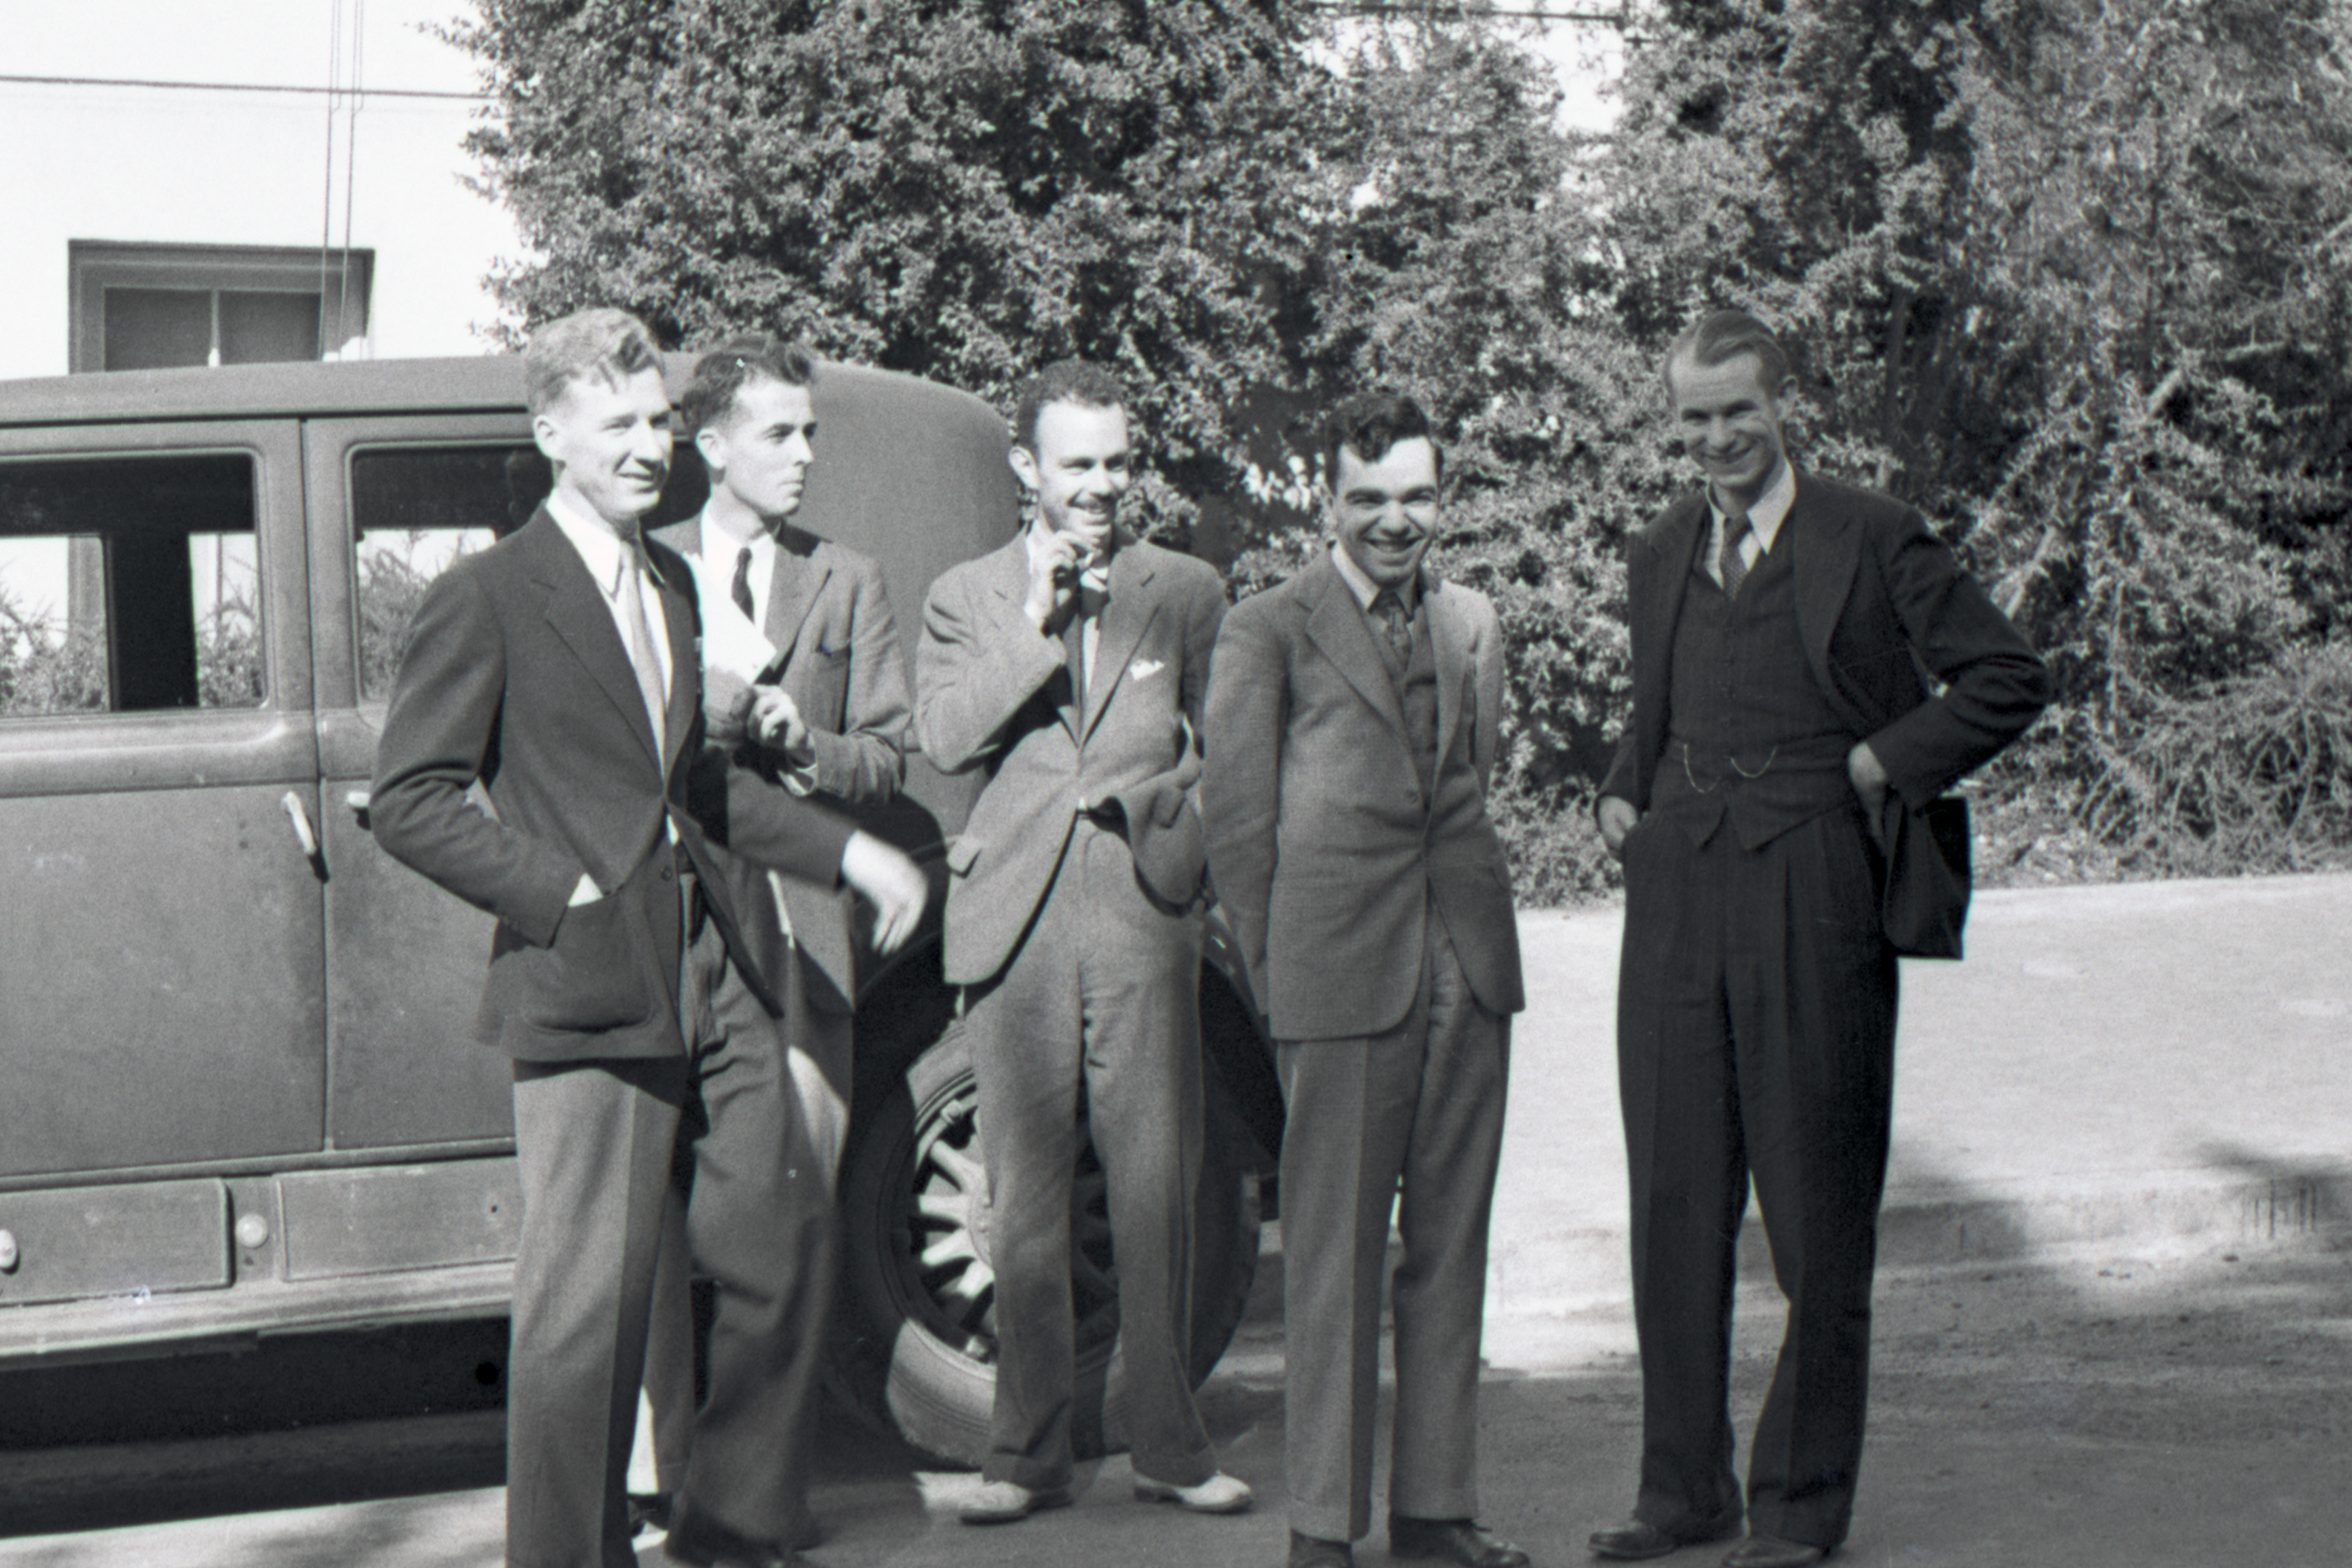 black and white photo of five men in coat and tie in front of vehicle and trees